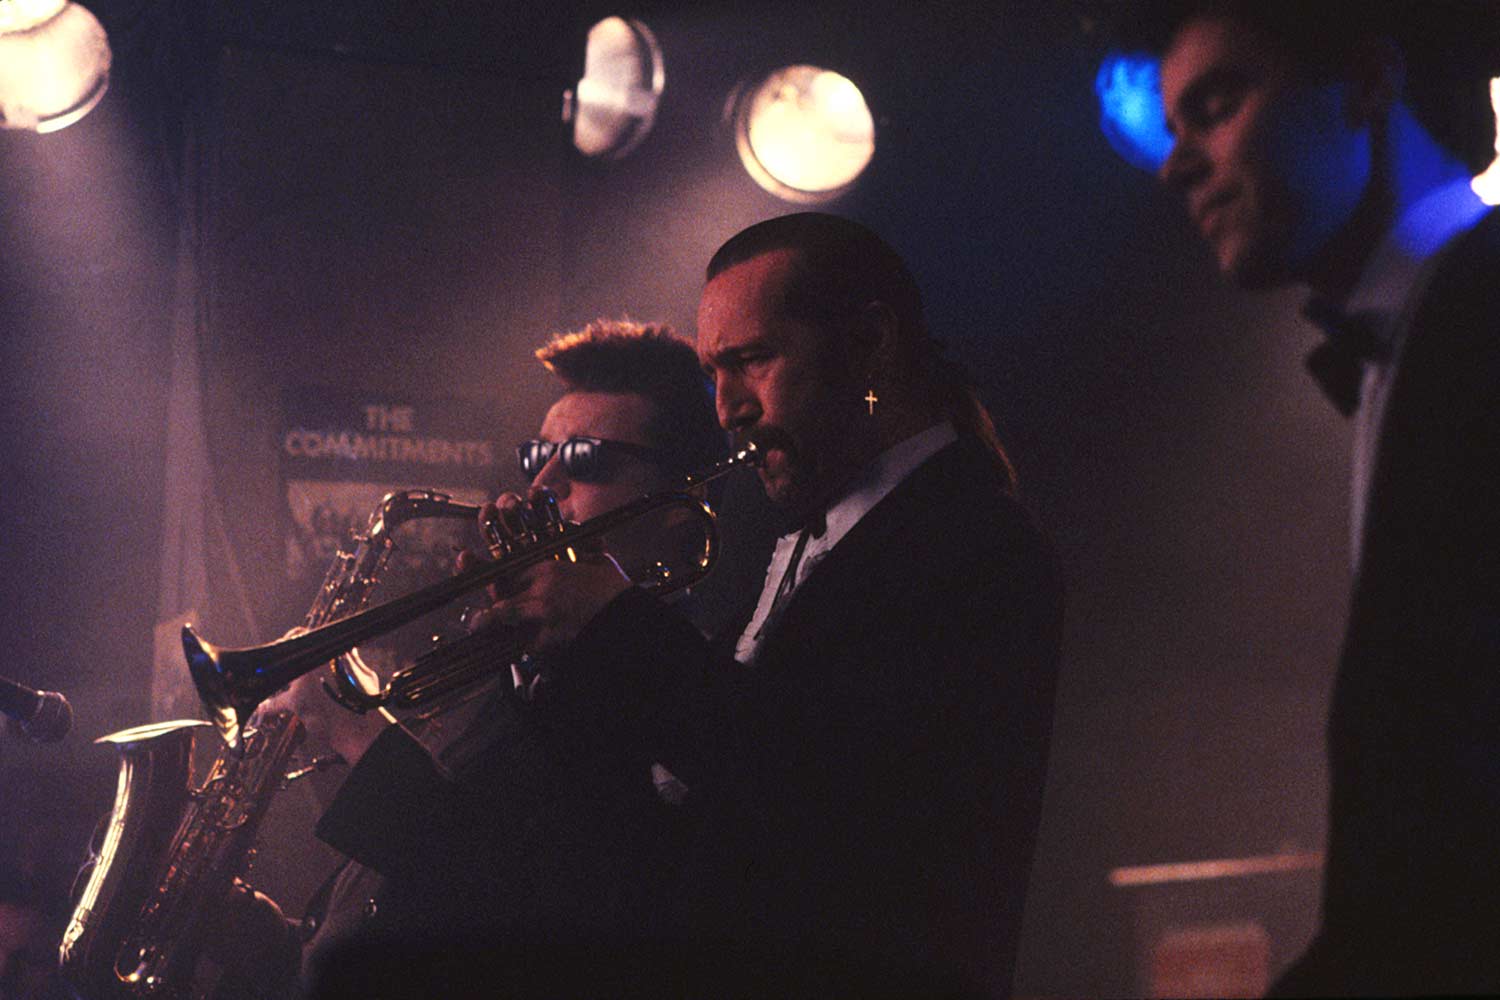 Robert Arkins scene from The Commitments